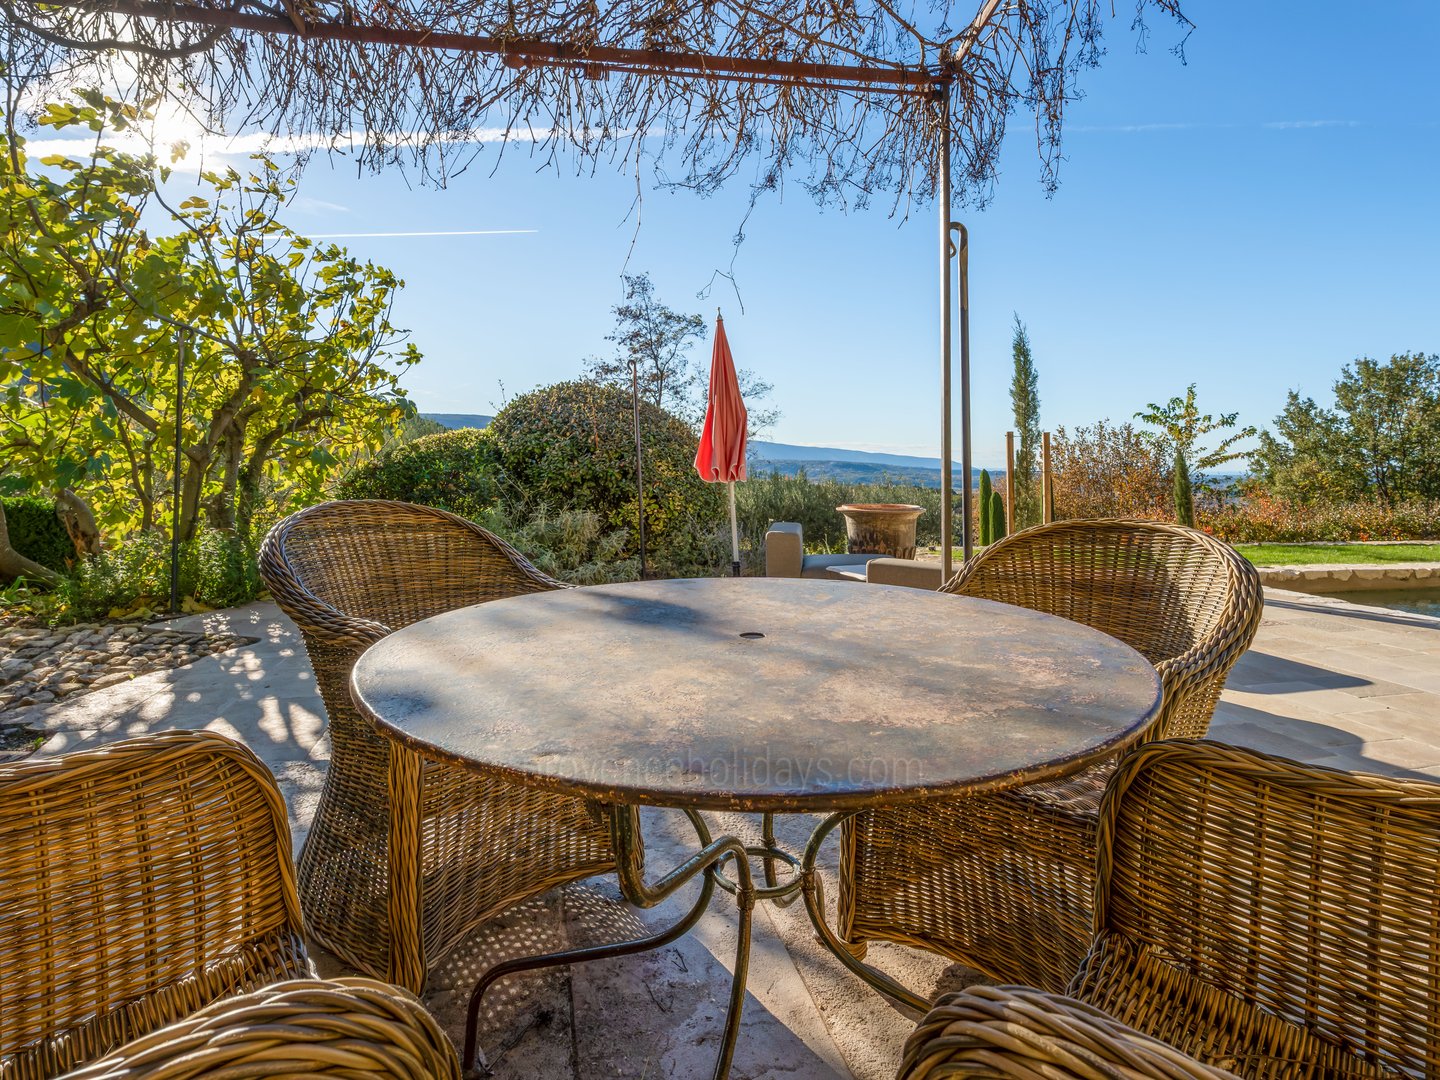 18th century Bastide with views of Luberon for sale - Bonnieux - 28